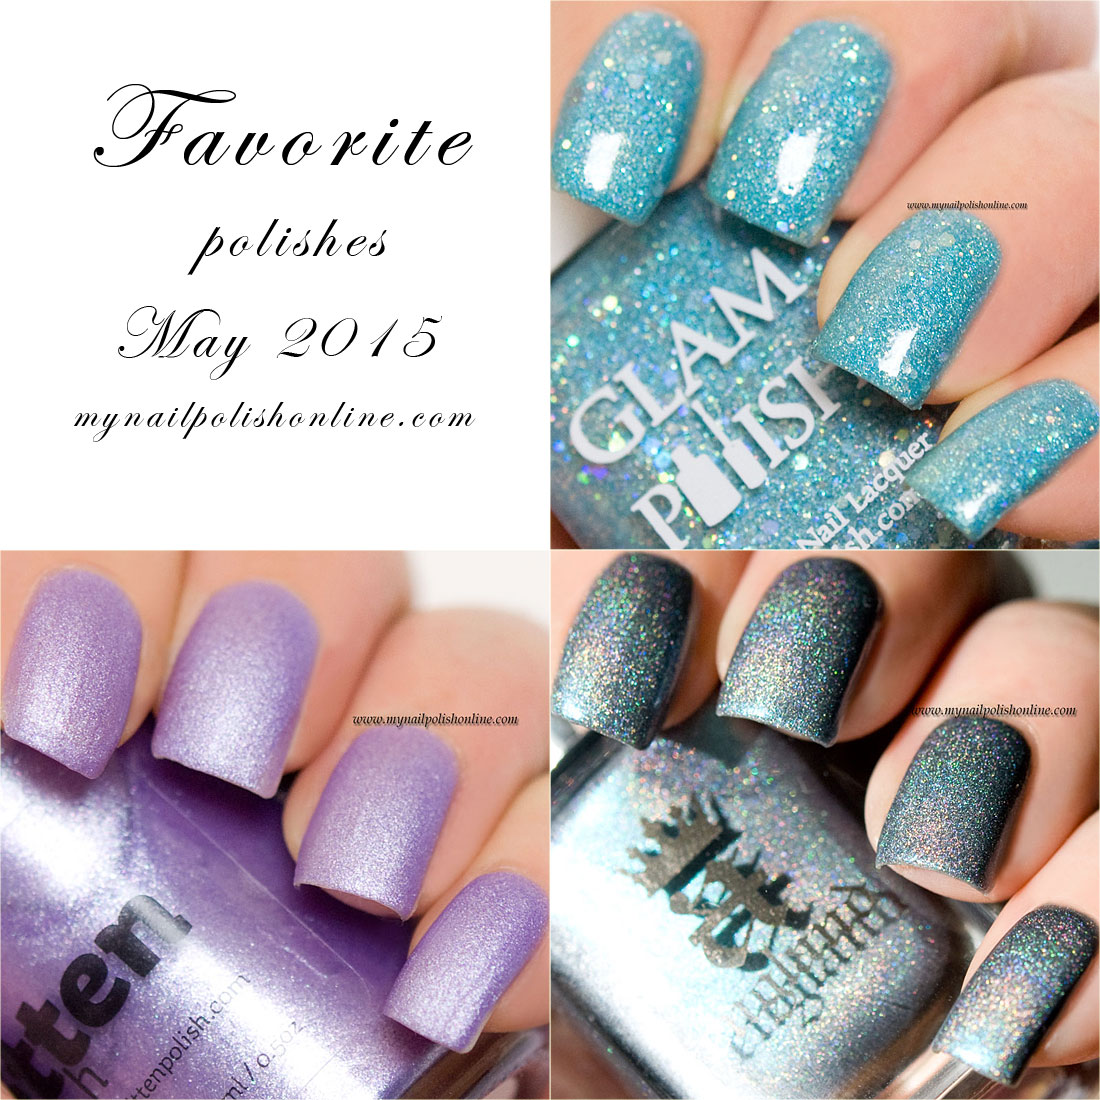 Favorite polishes may 2015